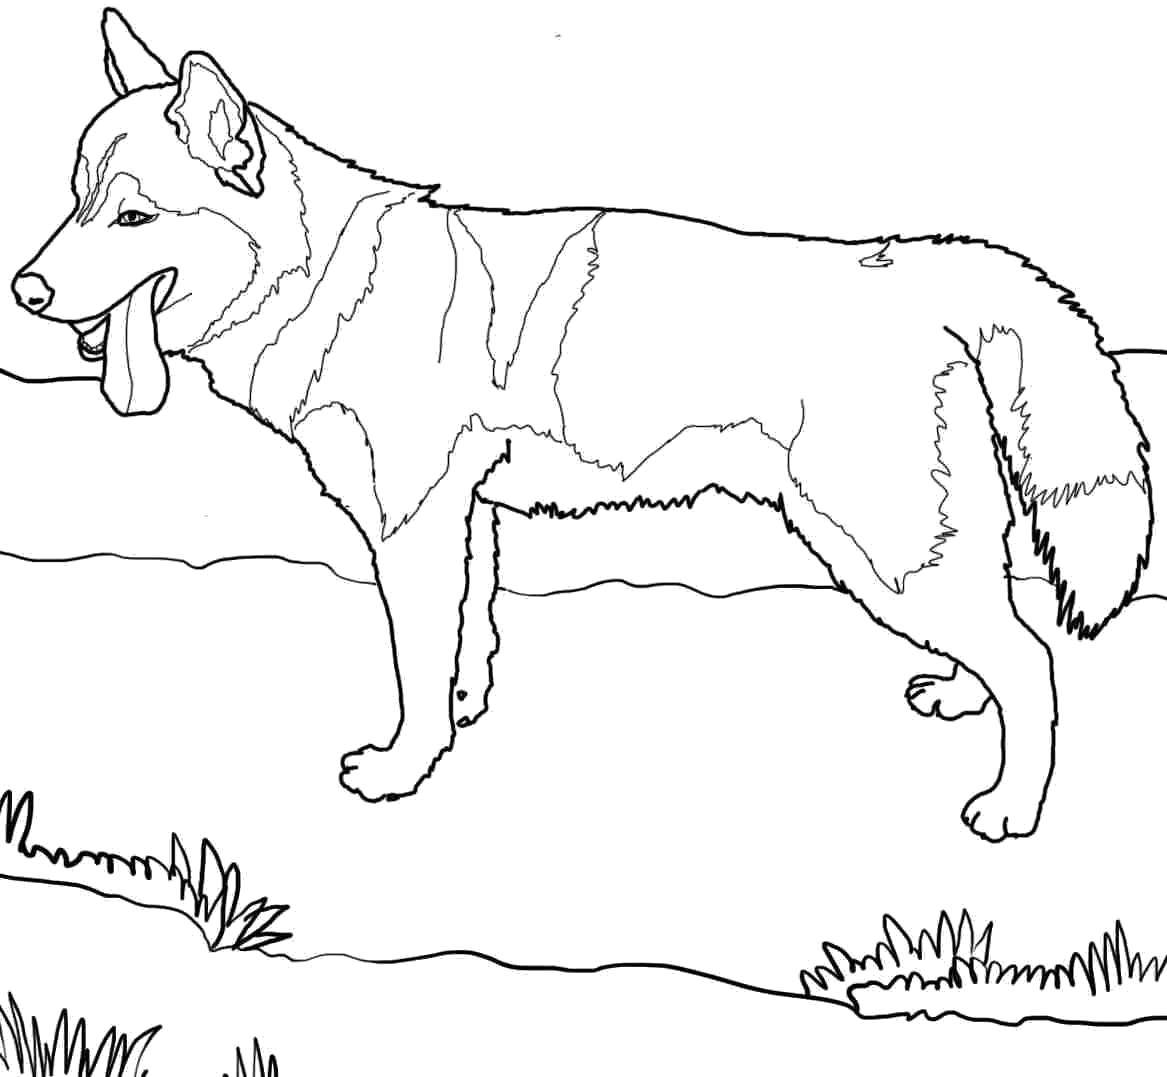 Coloring Dog. Category Animals. Tags:  Animals, dog.